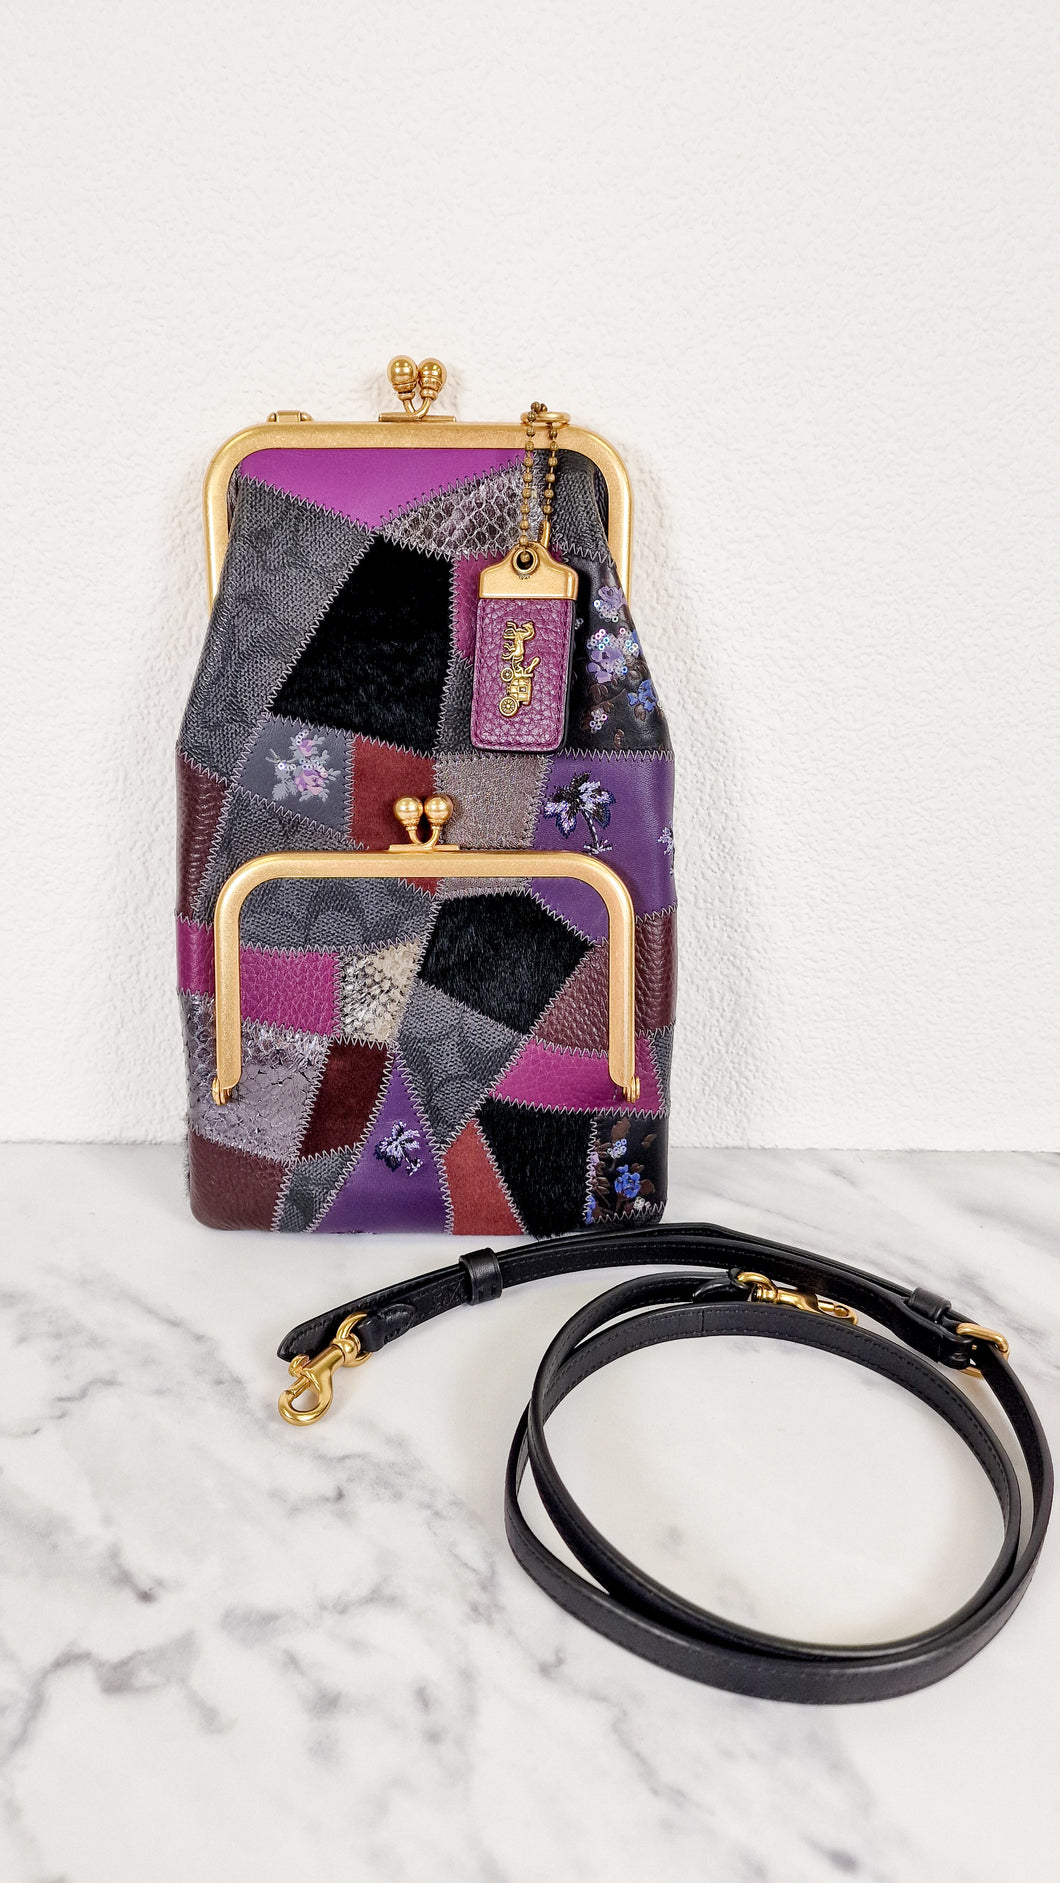 Coach 1941 Double Frame Kisslock Crossbody Bag with Signature Patchwork Purple Leather  - SAMPLE BAG - Coach 72691